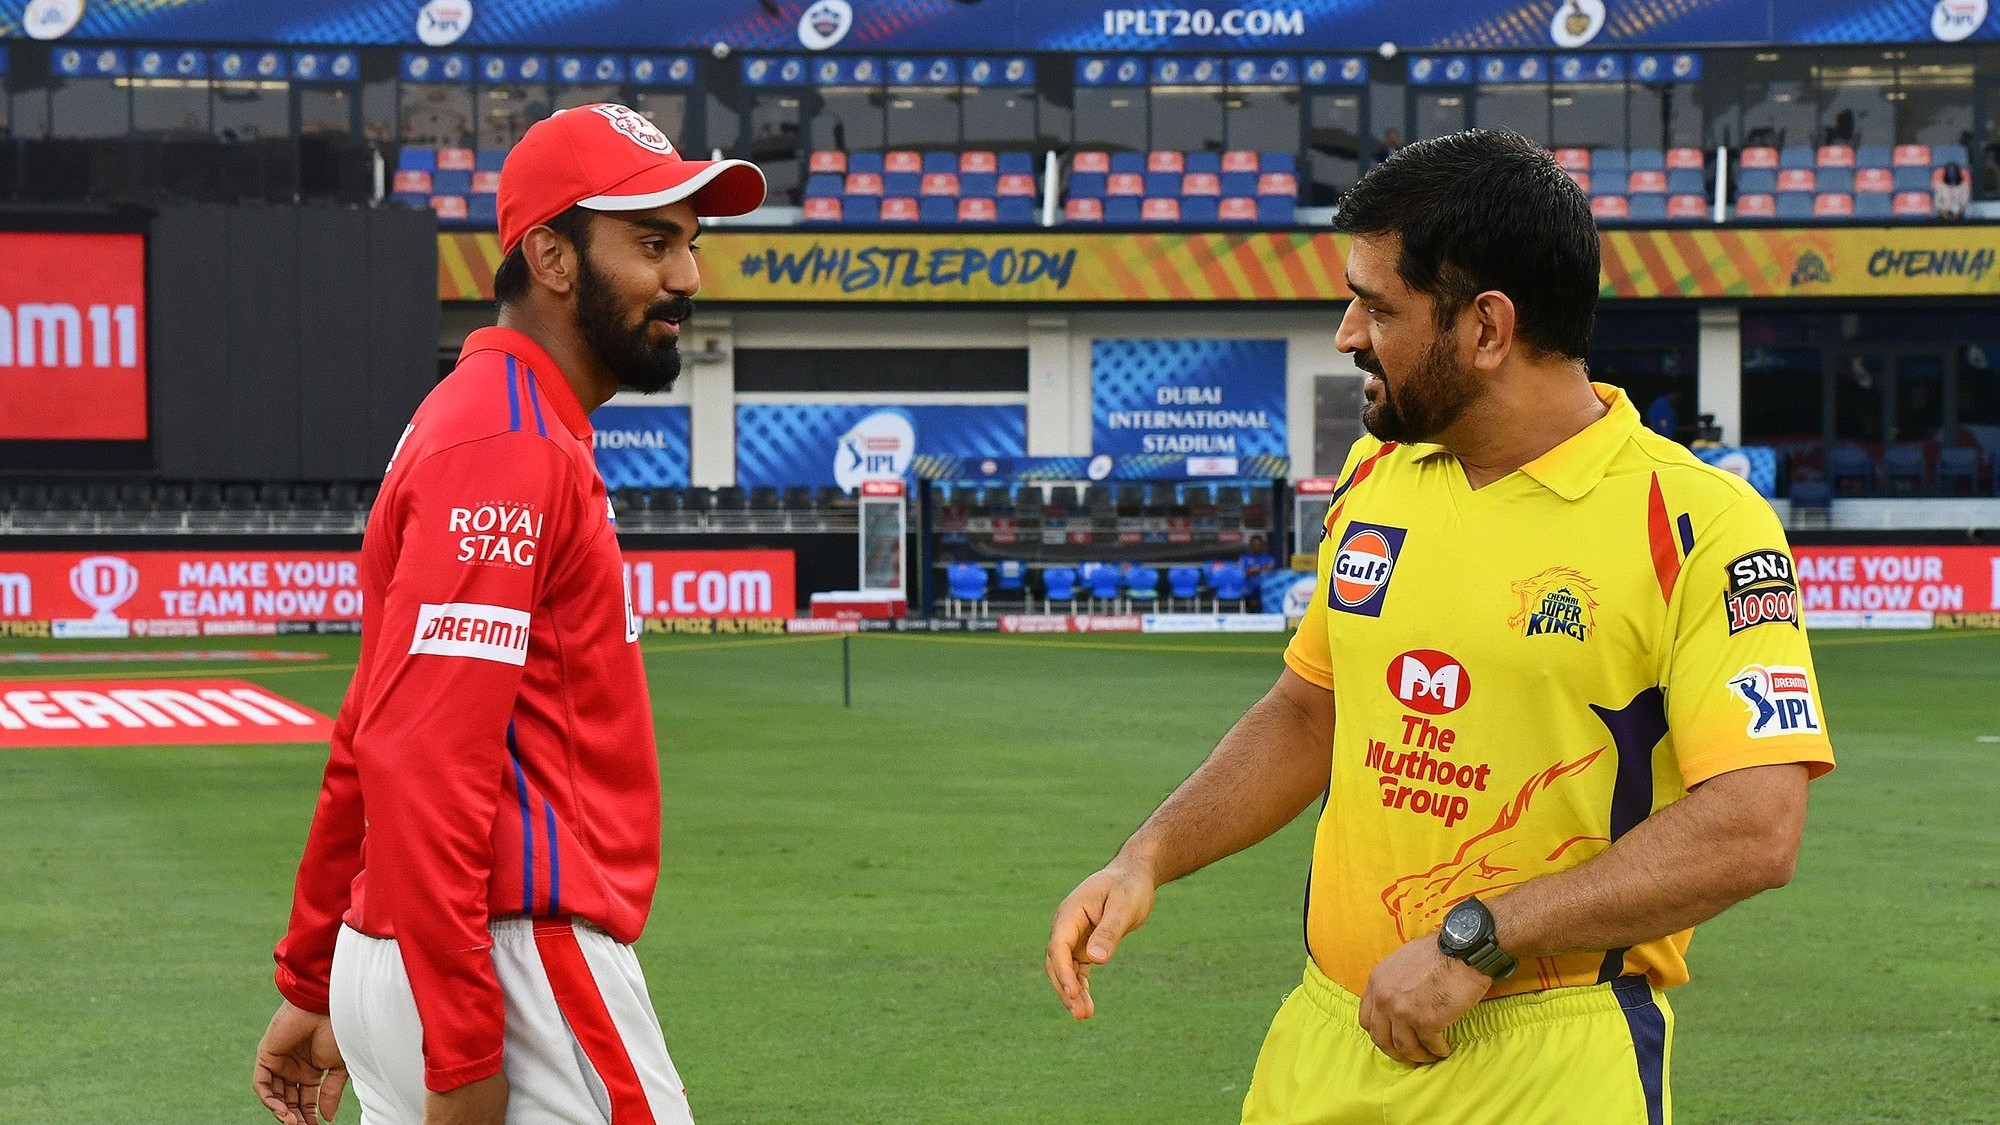 IPL 2020: Match 53, CSK vs KXIP – COC Predicted Playing XIs